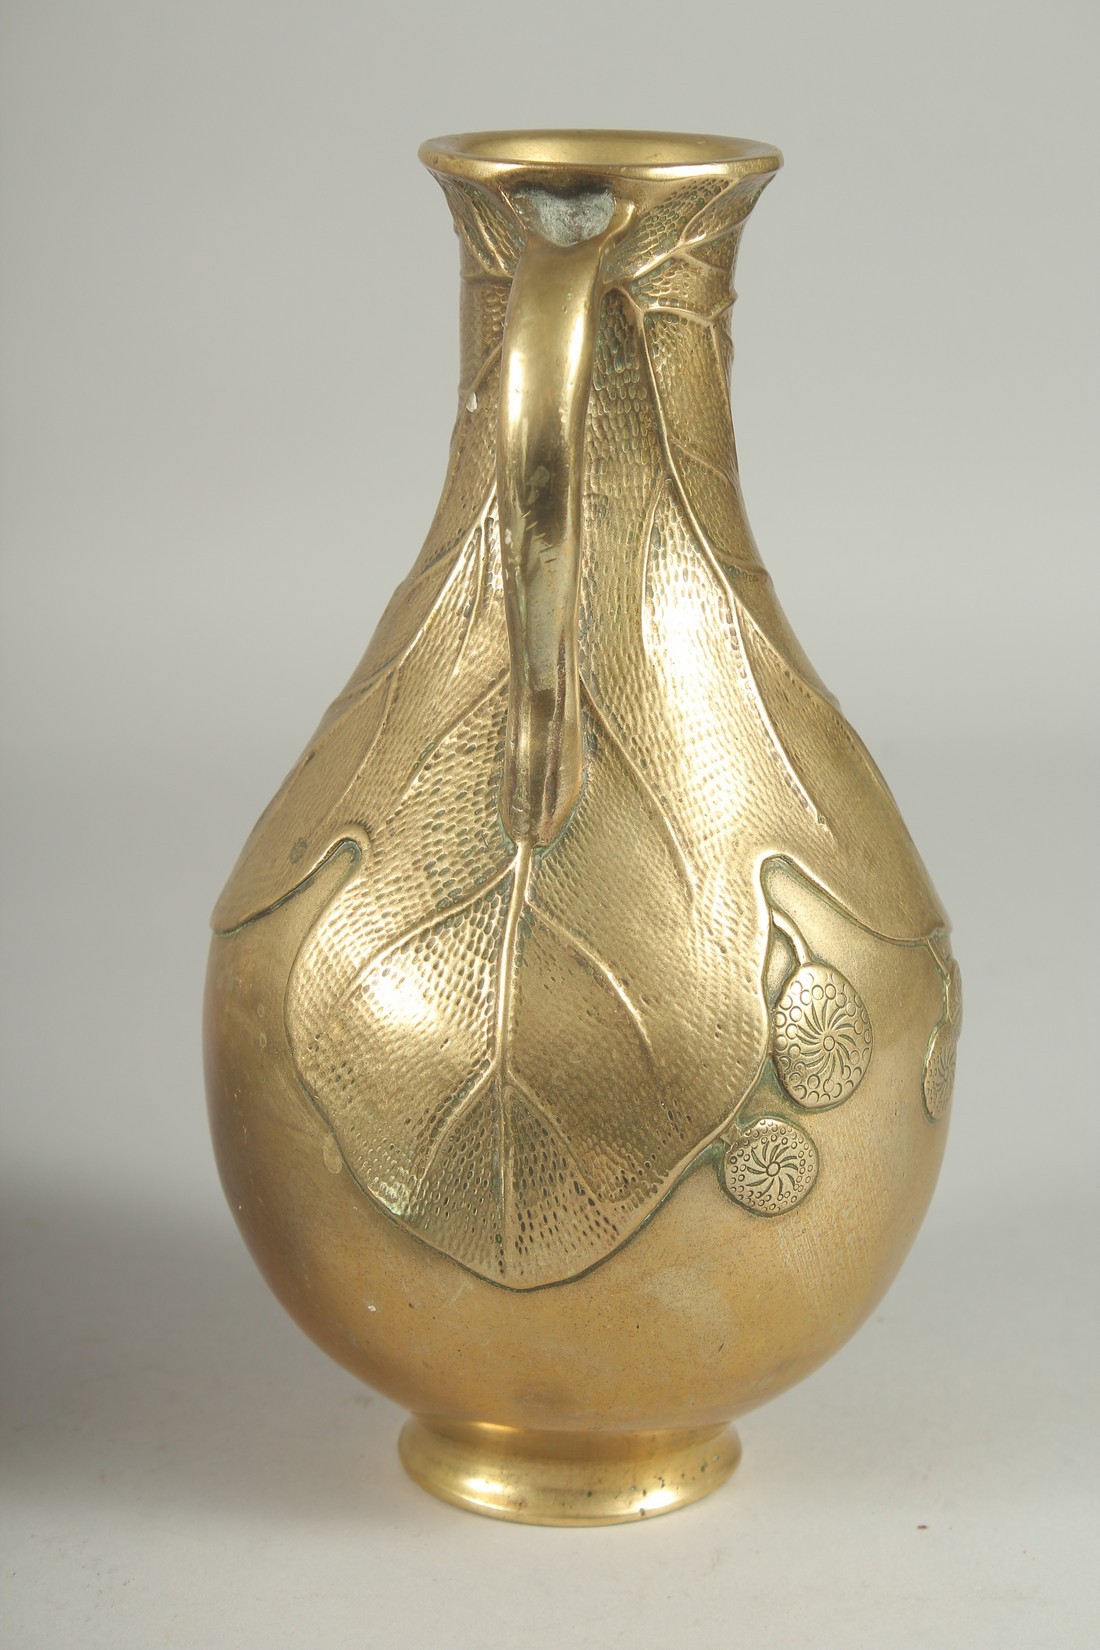 A JAPANESE BRASS JUG, with relief foliate decoration, 23cm high. - Image 4 of 6